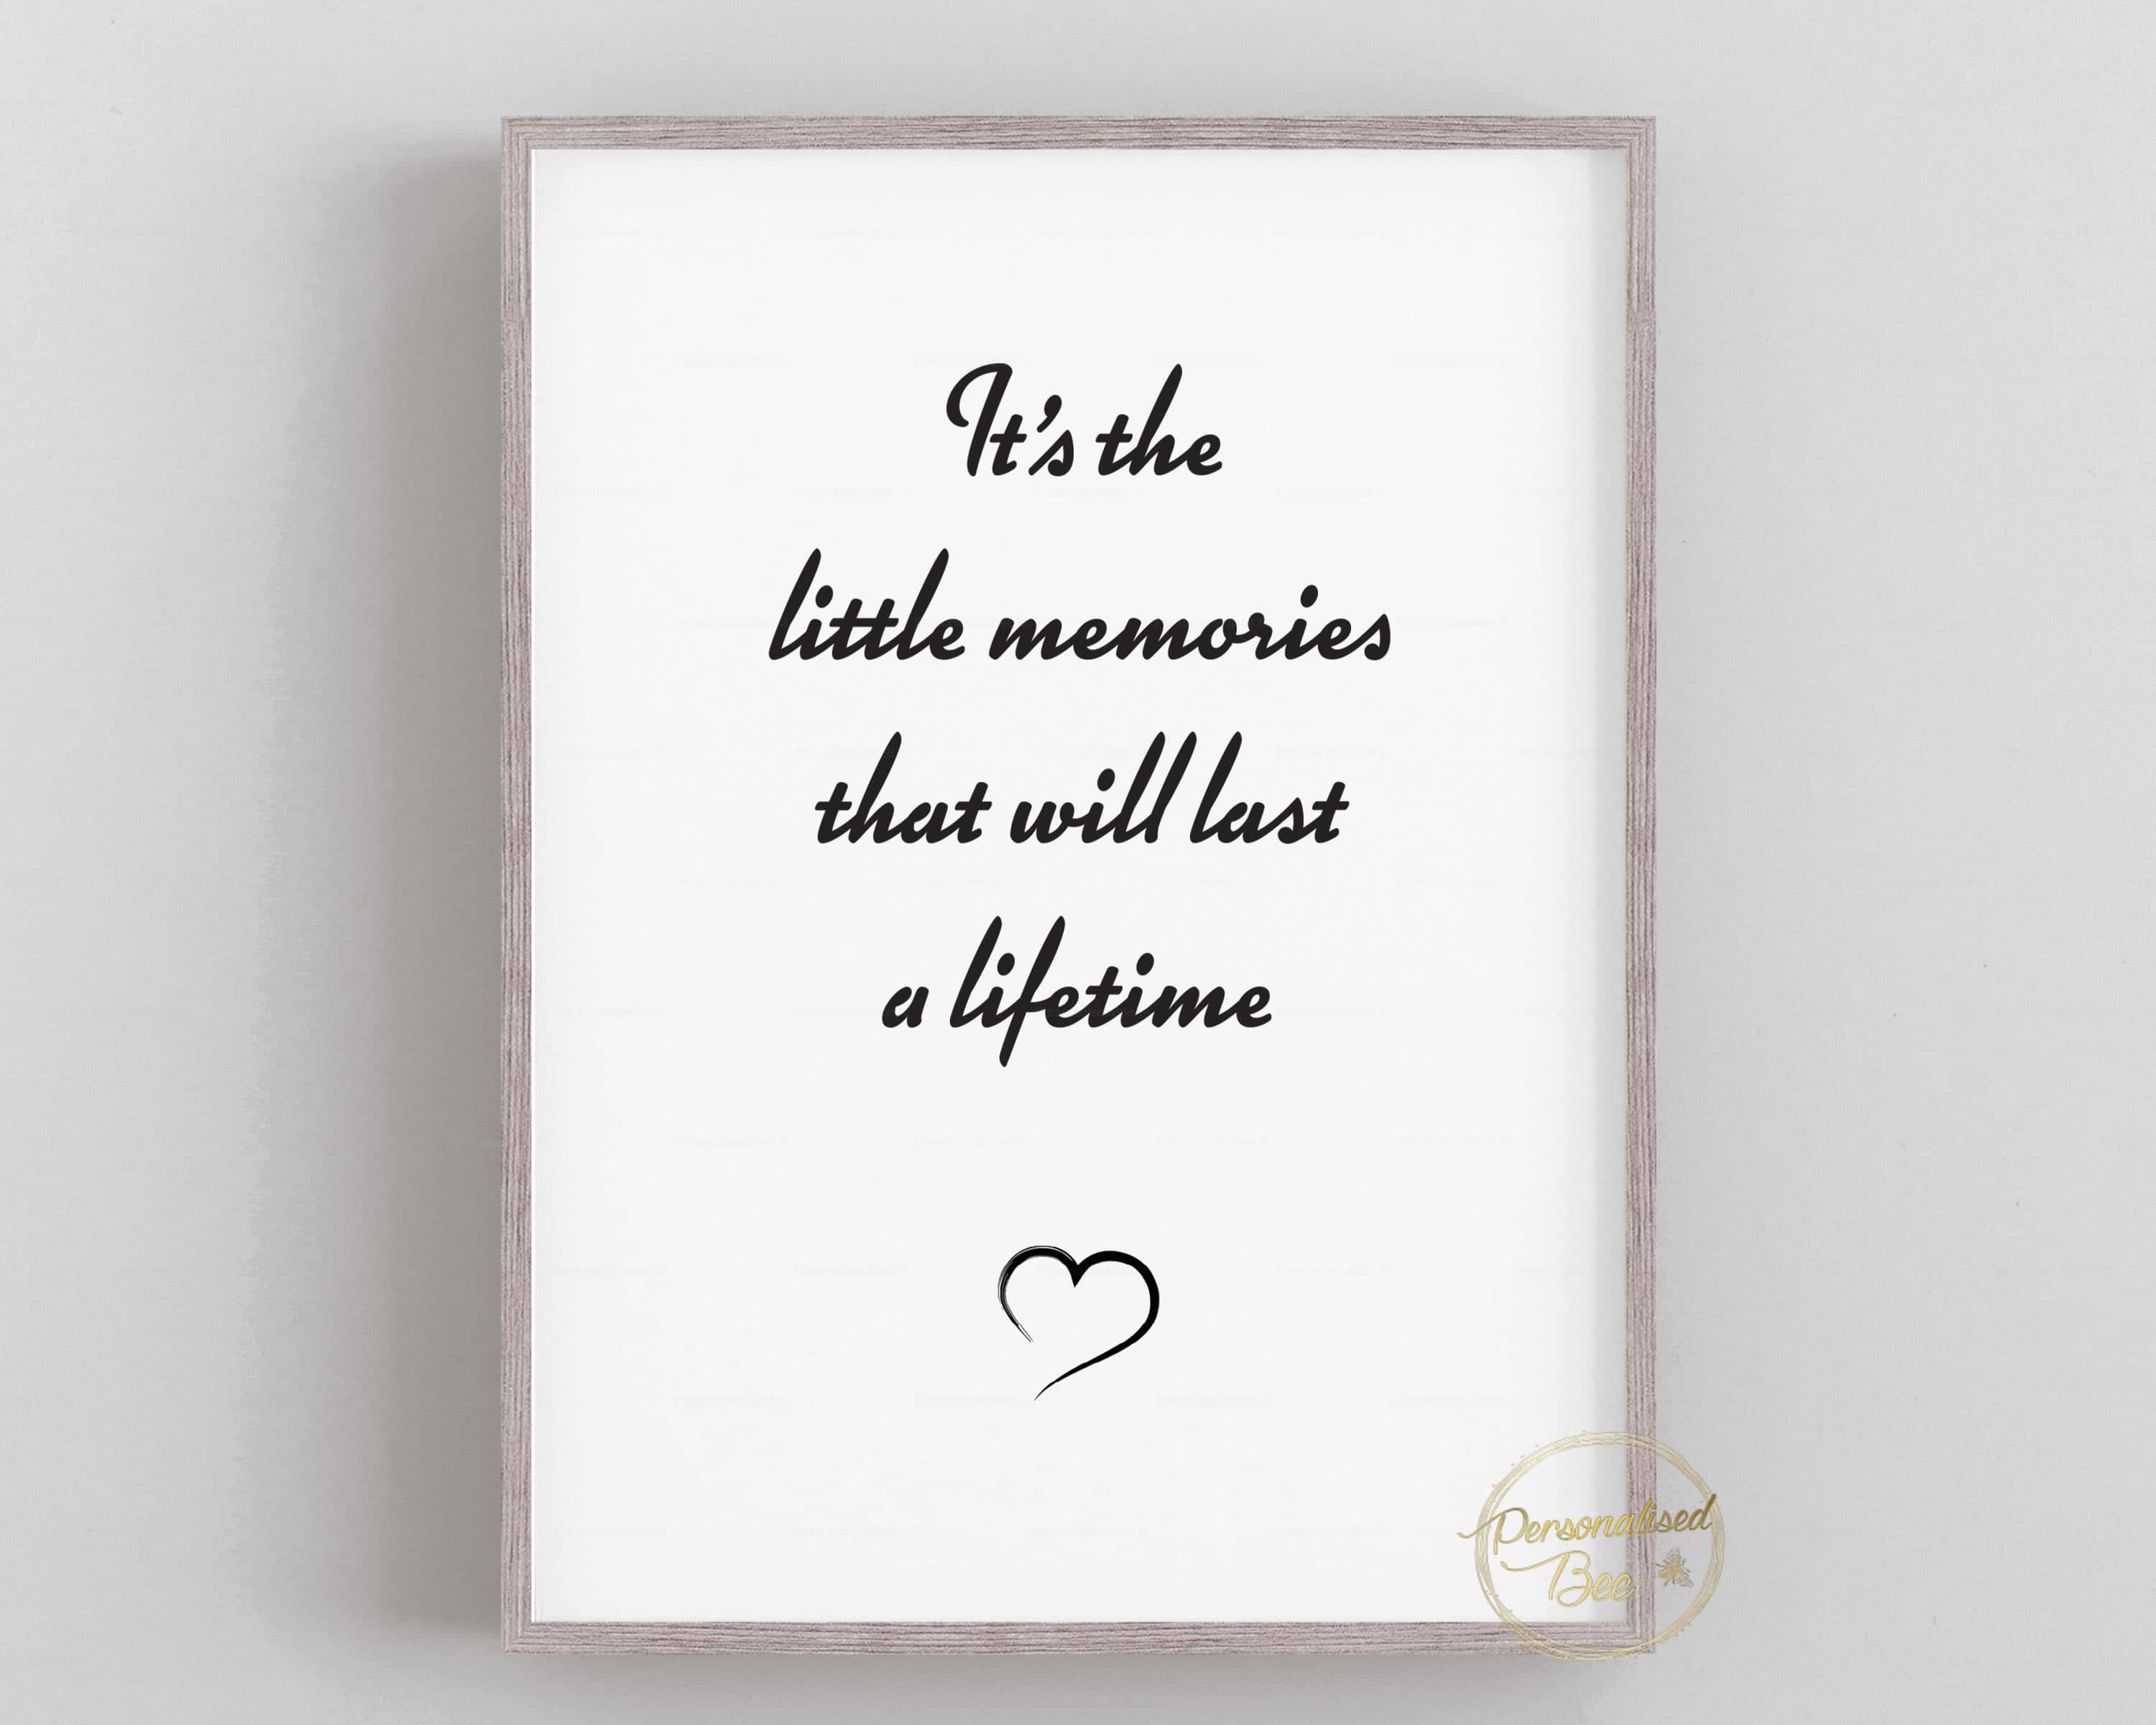 It's The Little Memories That Will Last A Lifetime Print - Print.